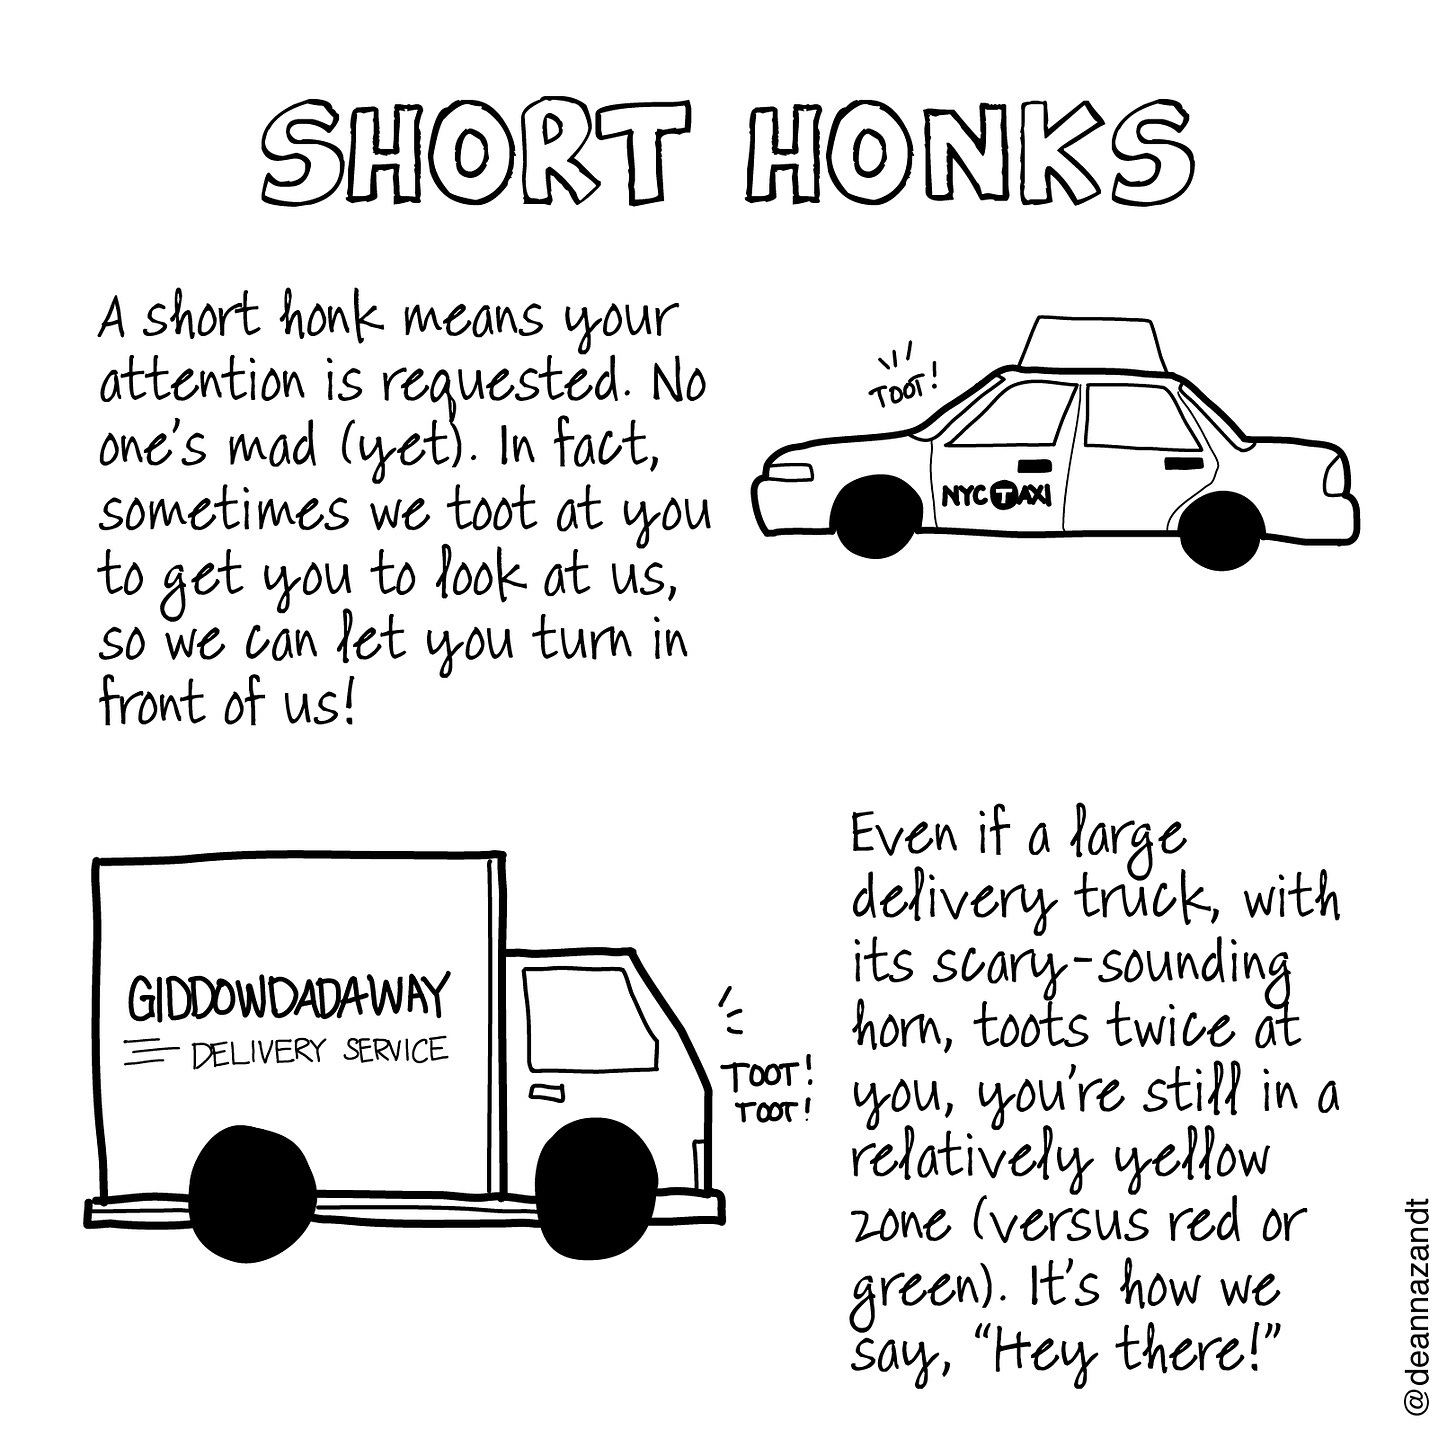 Slide 2: SHORT HONKS. A line drawing of a NYC taxi with the words "toot!" coming from its hood. This text is next to it: A short honk means your attention is requested. No one’s mad (yet). In fact, sometimes we toot at you to get you to look at us, so we can let you turn in front of us!  A line drawing of a delivery truck with the words, "GIDDOWDADAWAY Delivery Service" on the side, and the words "toot! toot!" coming from its hood. This text is next to it: Even if a large delivery truck, with its scary-sounding horn, toots twice at you, you’re still in a relatively yellow zone (versus red or green). It’s how we say, “Hey there!”